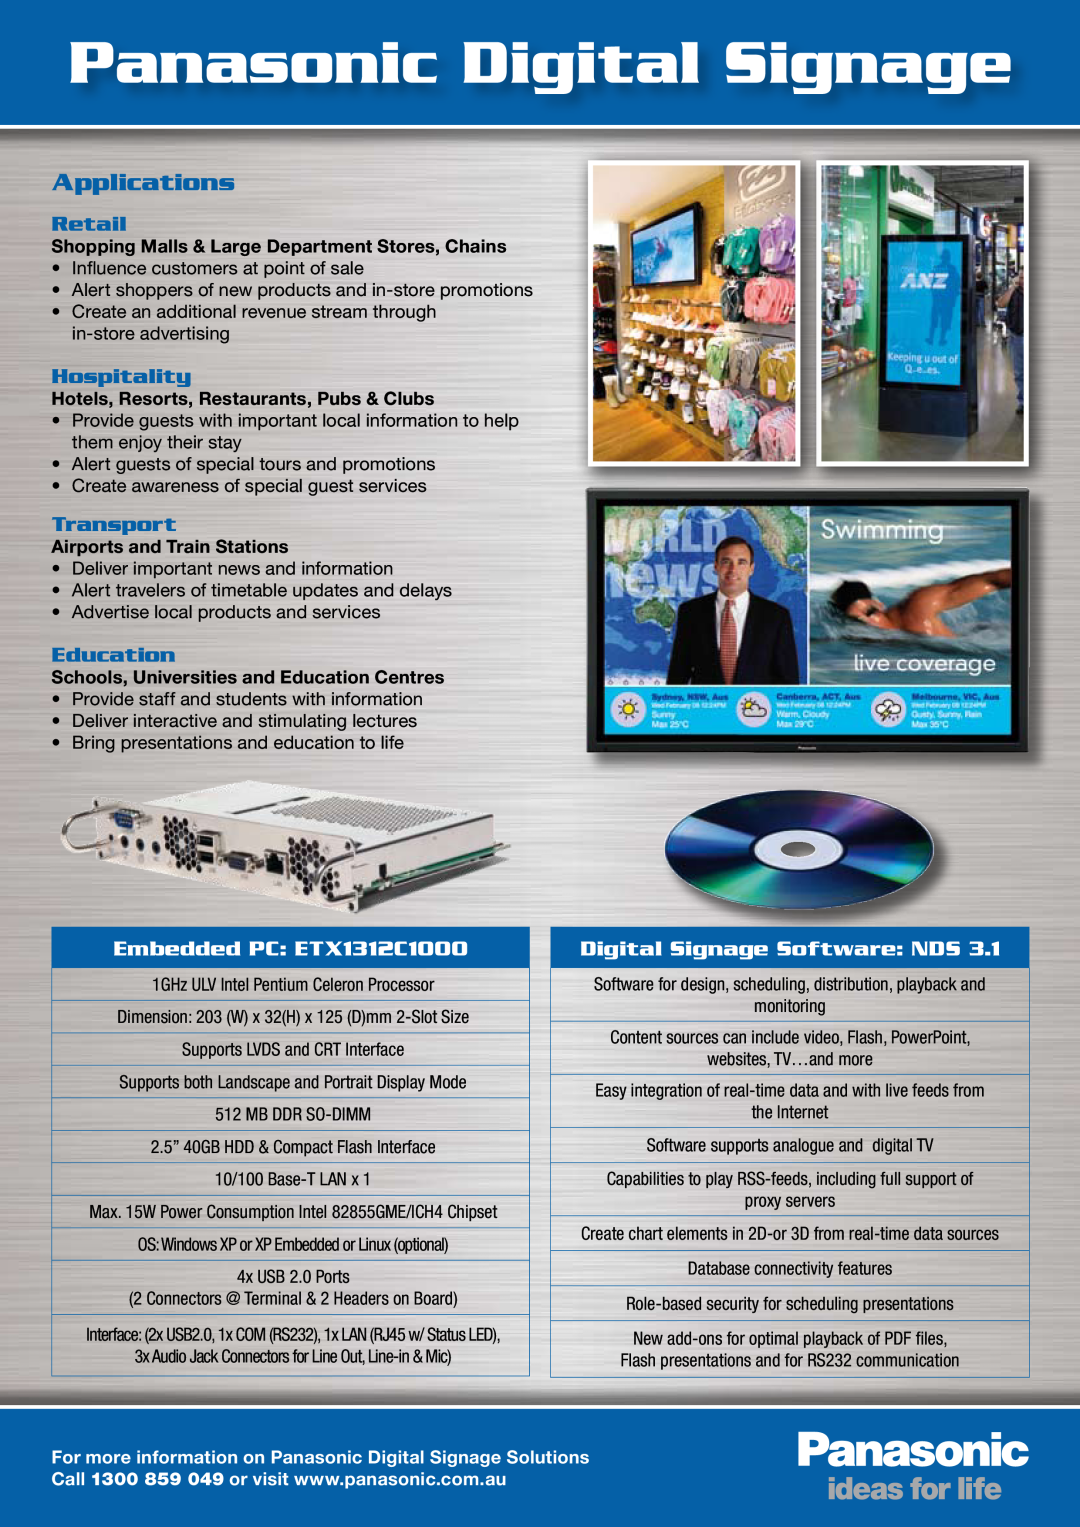 Panasonic Digital Signage Shopping Malls & Large Department Stores, Chains, Hotels, Resorts, Restaurants, Pubs & Clubs 